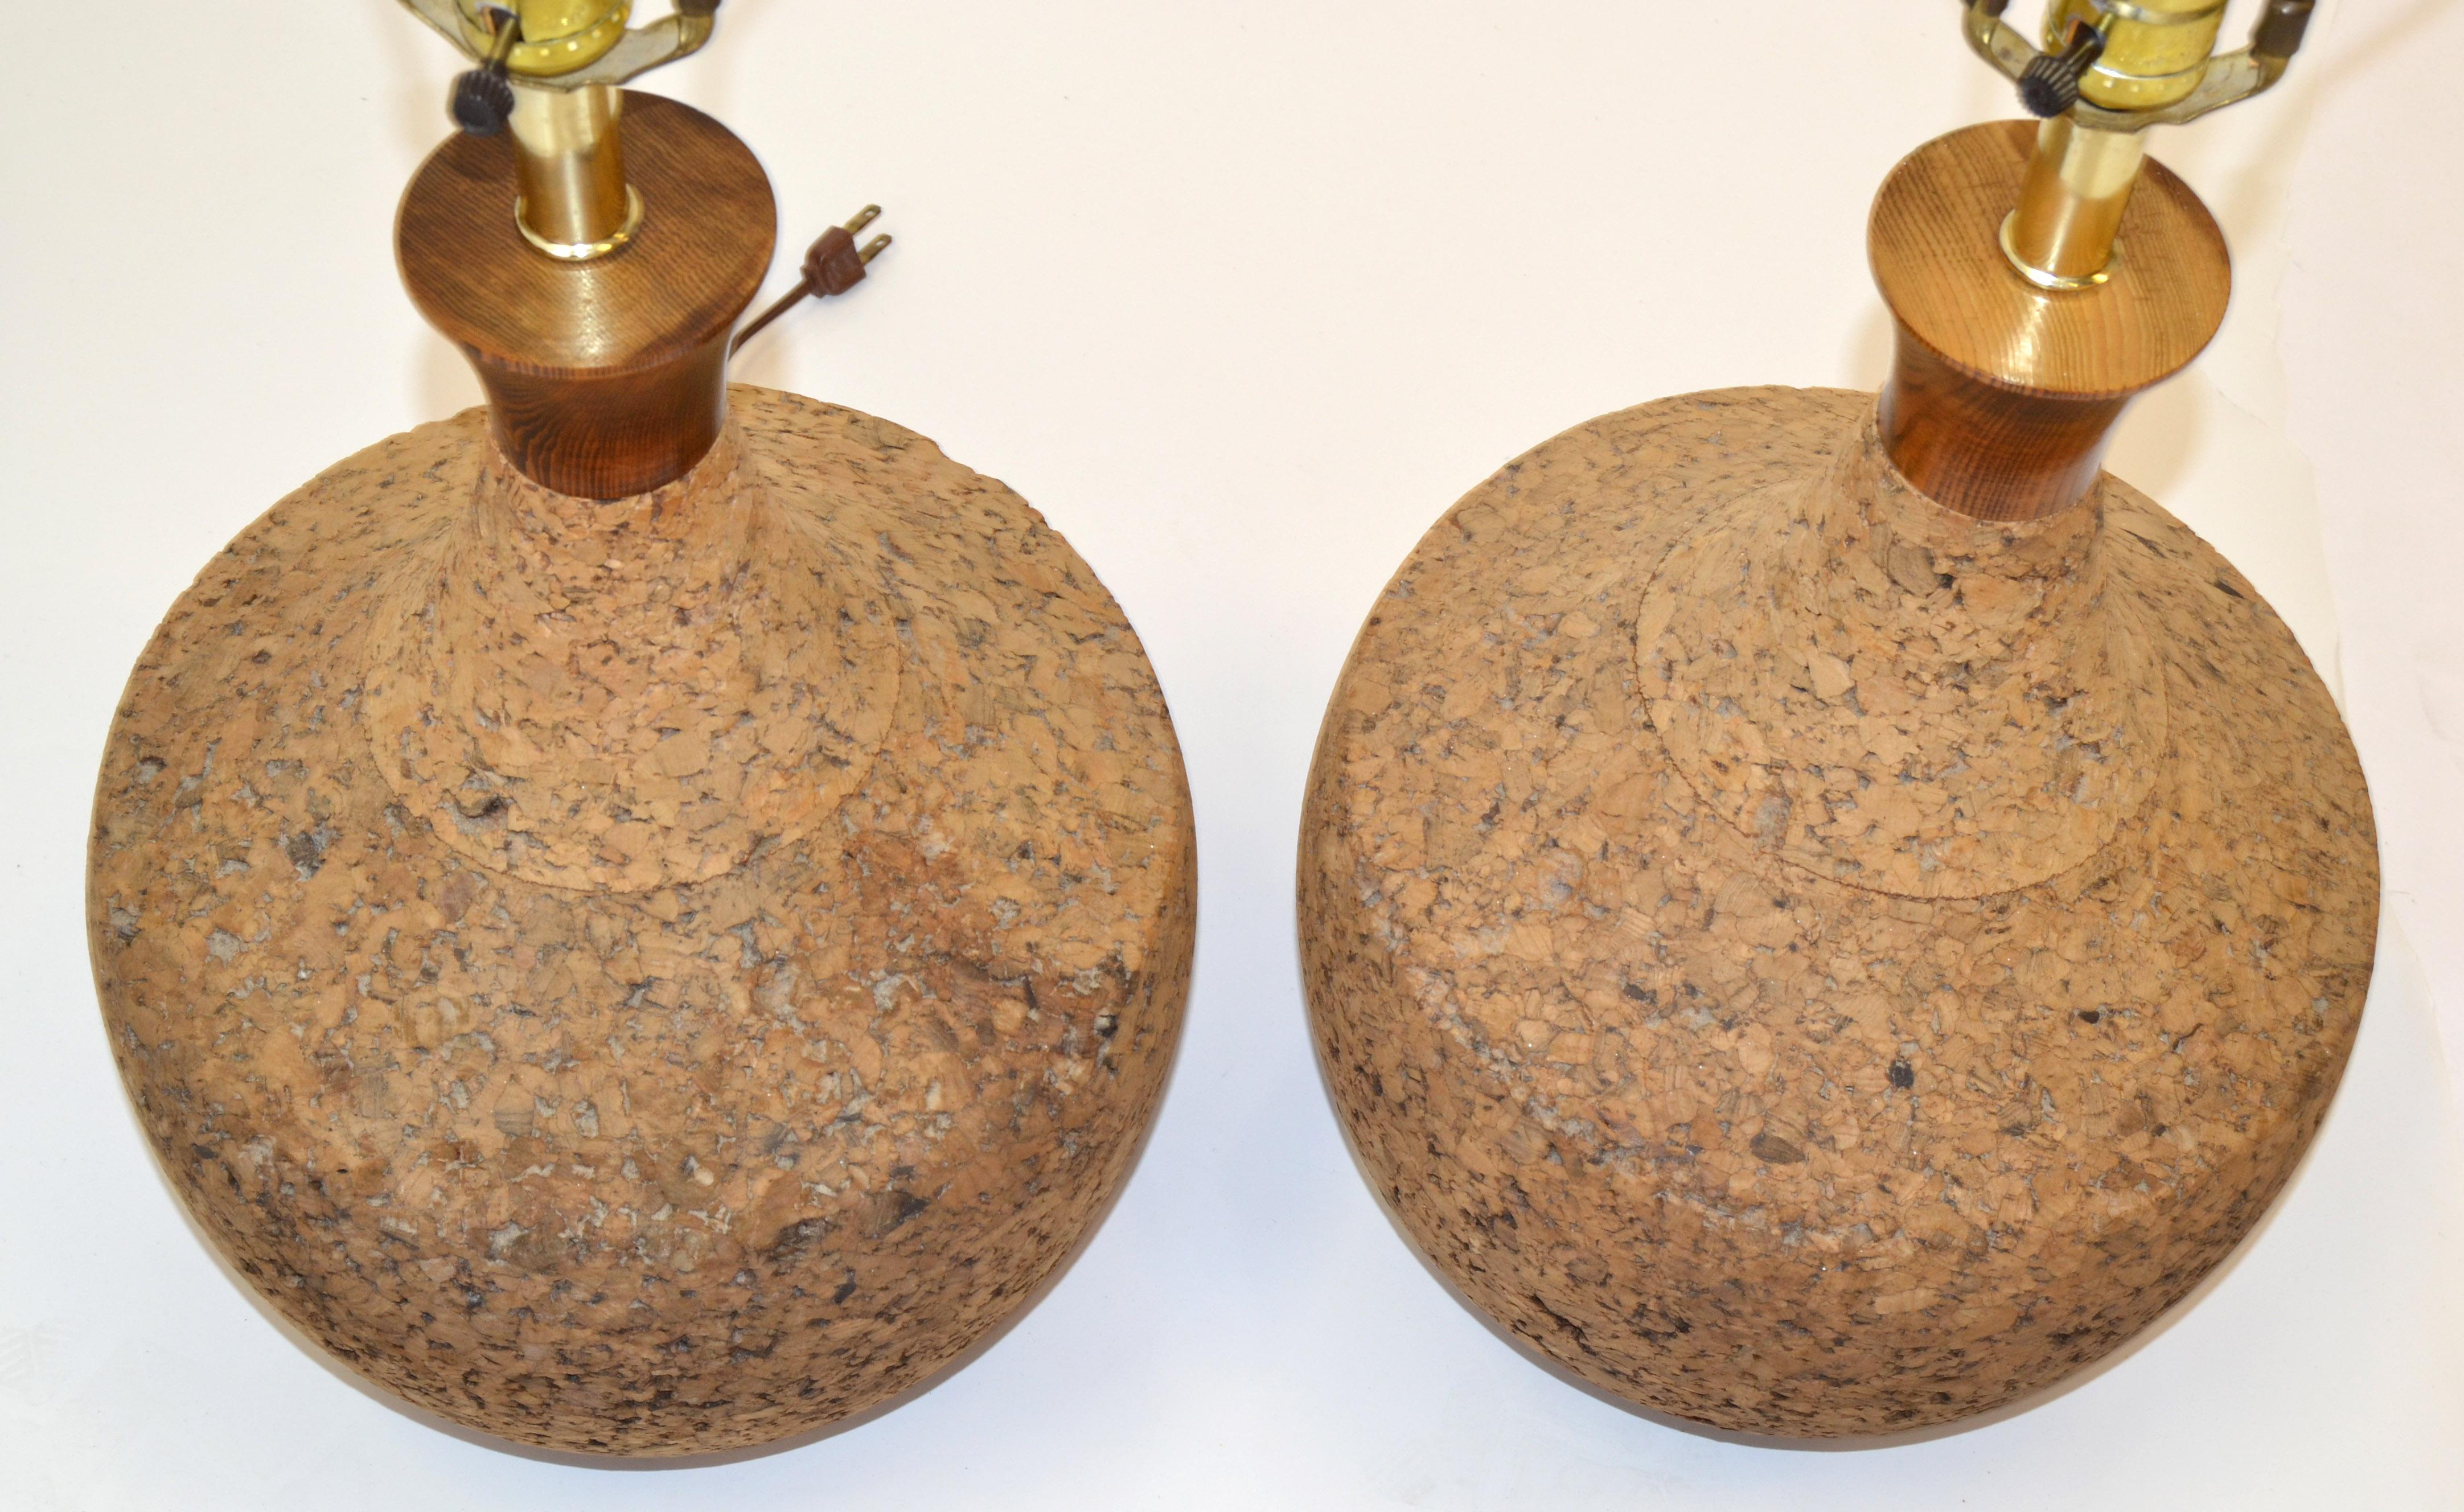 Set, Scandinavian Modern 1960s Cork and Teak Table Lamps Walter Von Nessen Style In Good Condition For Sale In Miami, FL